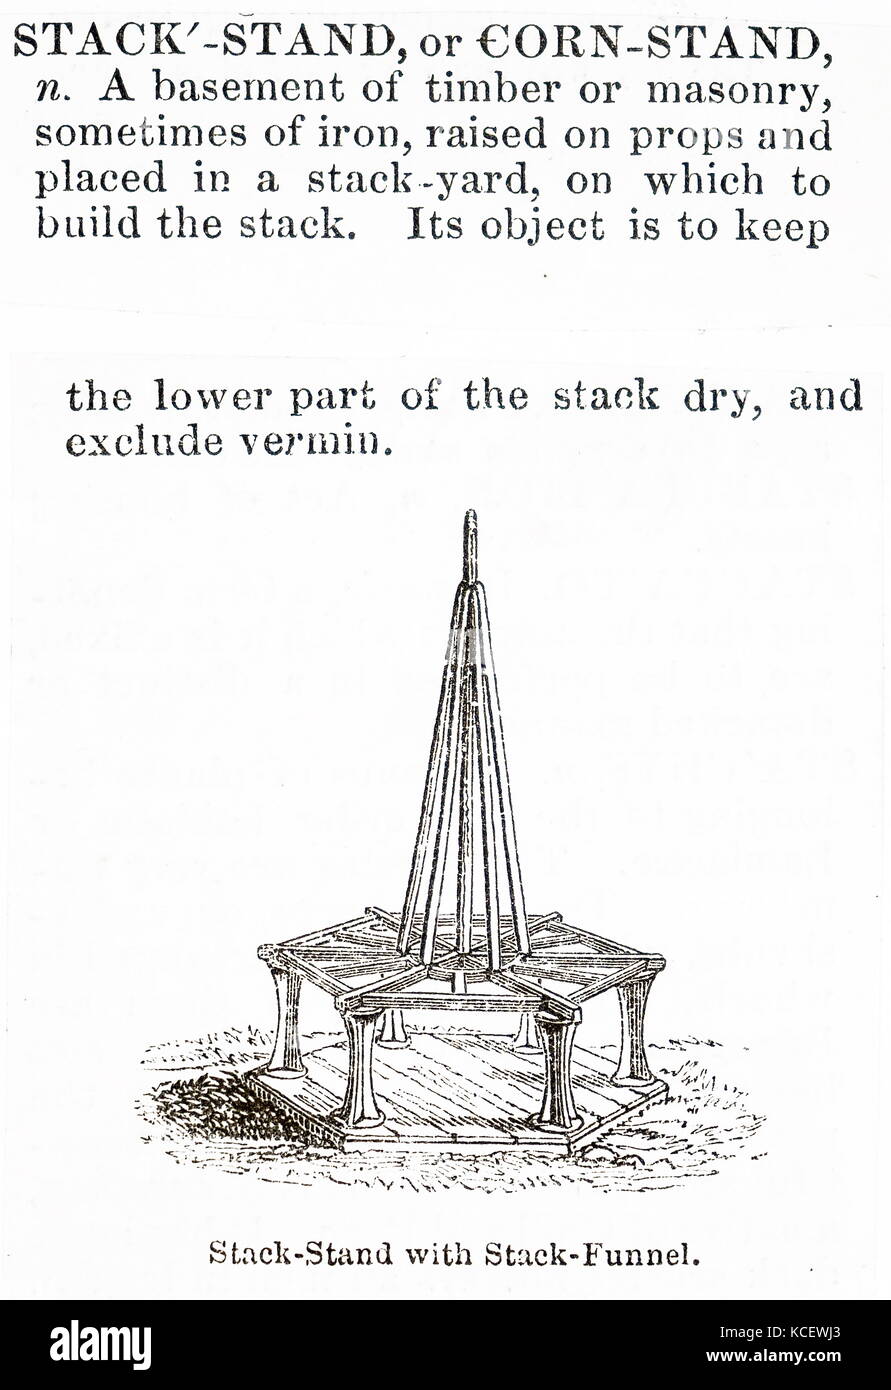 Engraving depicting a stack-stand with a stack-funnel. Dated 19th Century Stock Photo